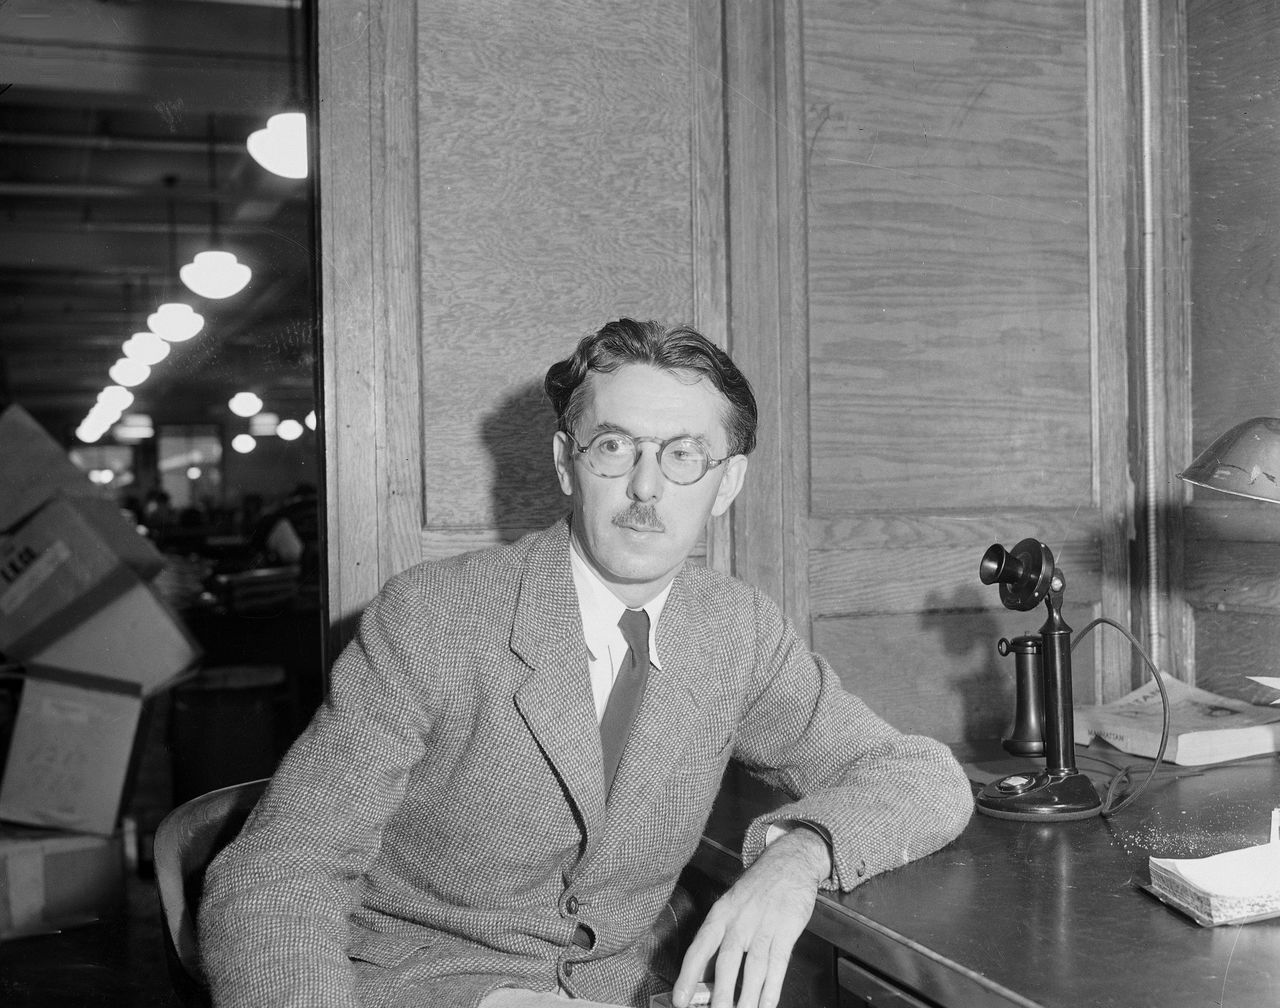 This Aug. 8, 1936, photo shows writer James Thurber in New York.